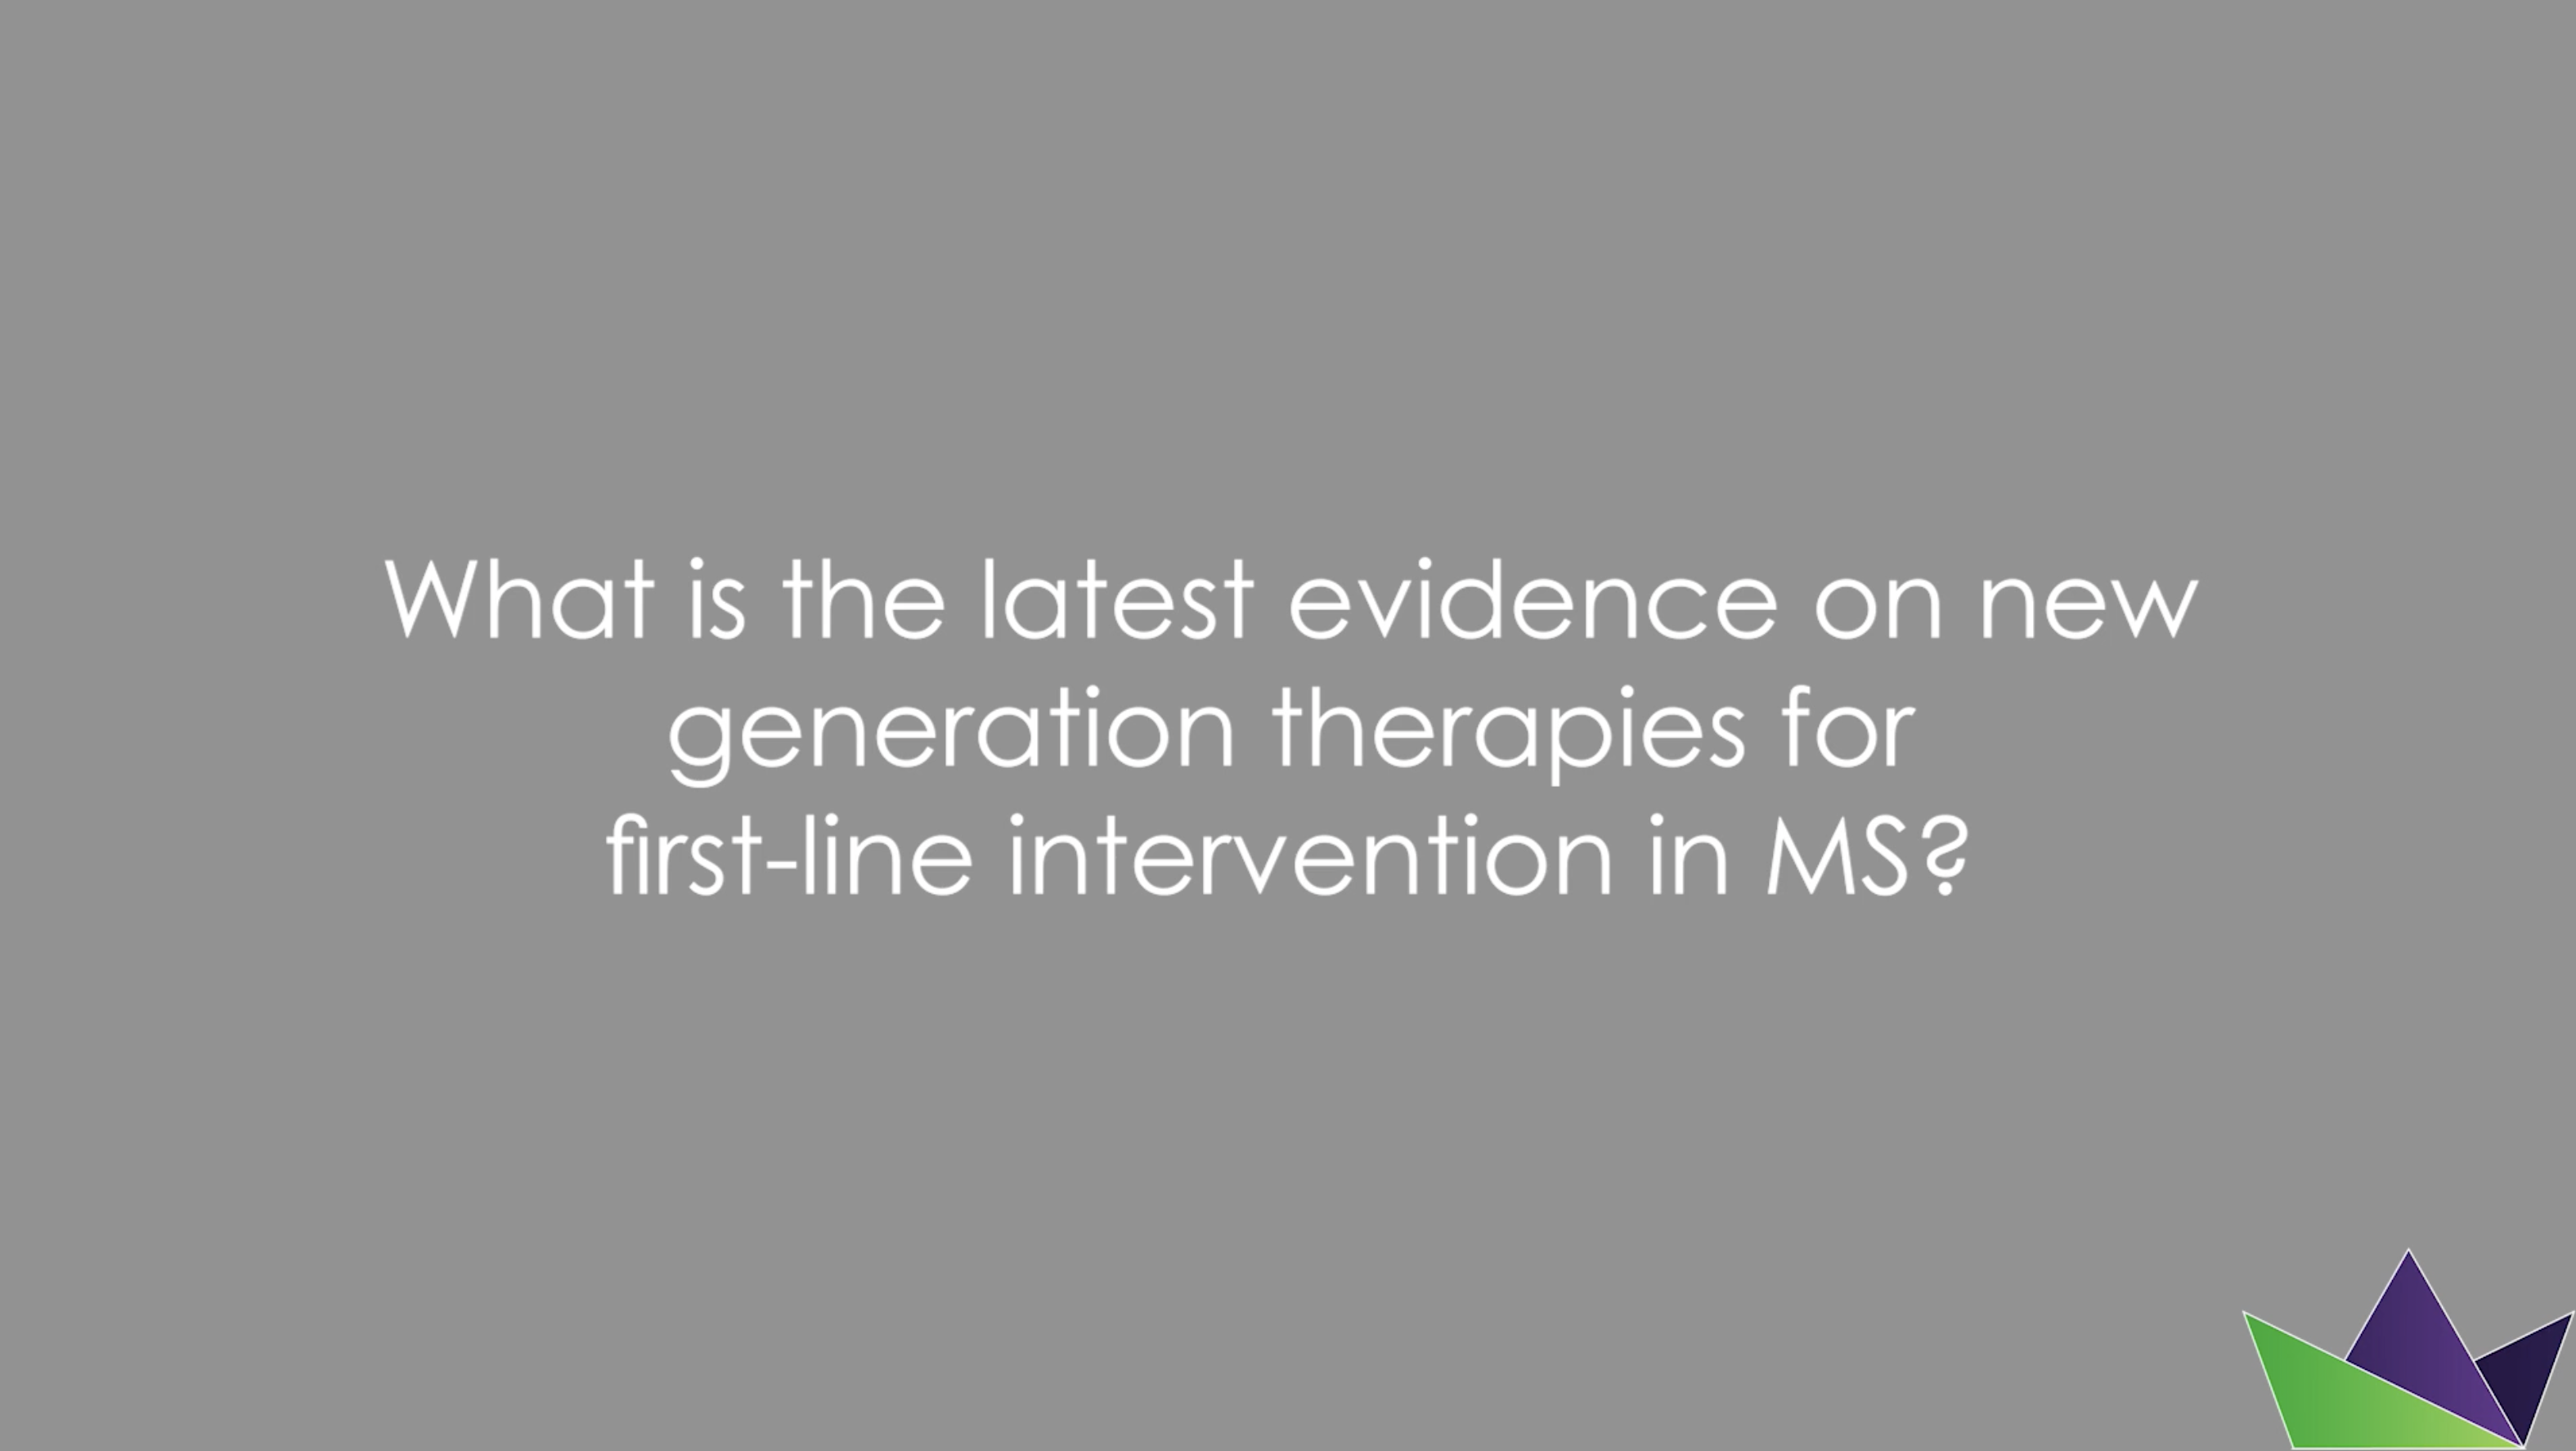 What is the latest evidence on new generation therapies for first-line intervention in MS